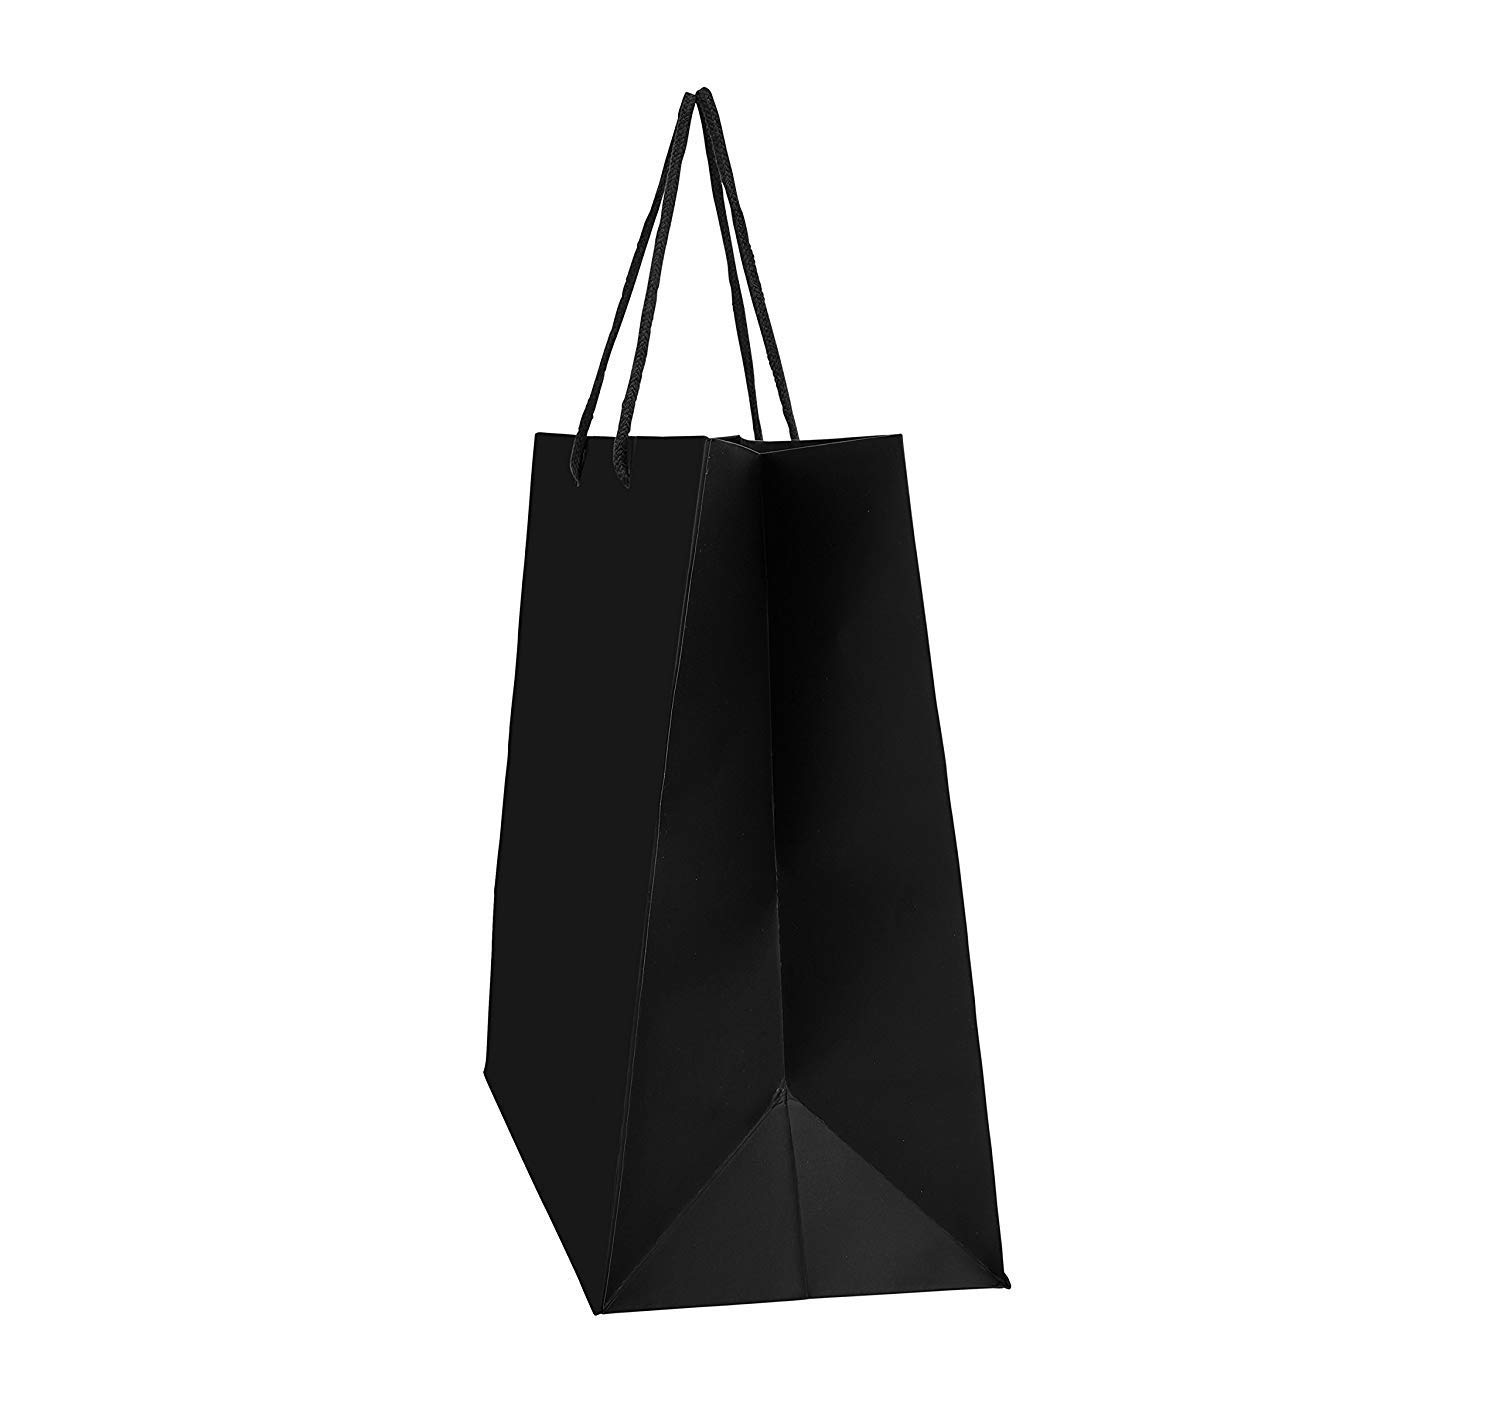 How To Pick The Right Paper Bag Manufacturer For Your Product?